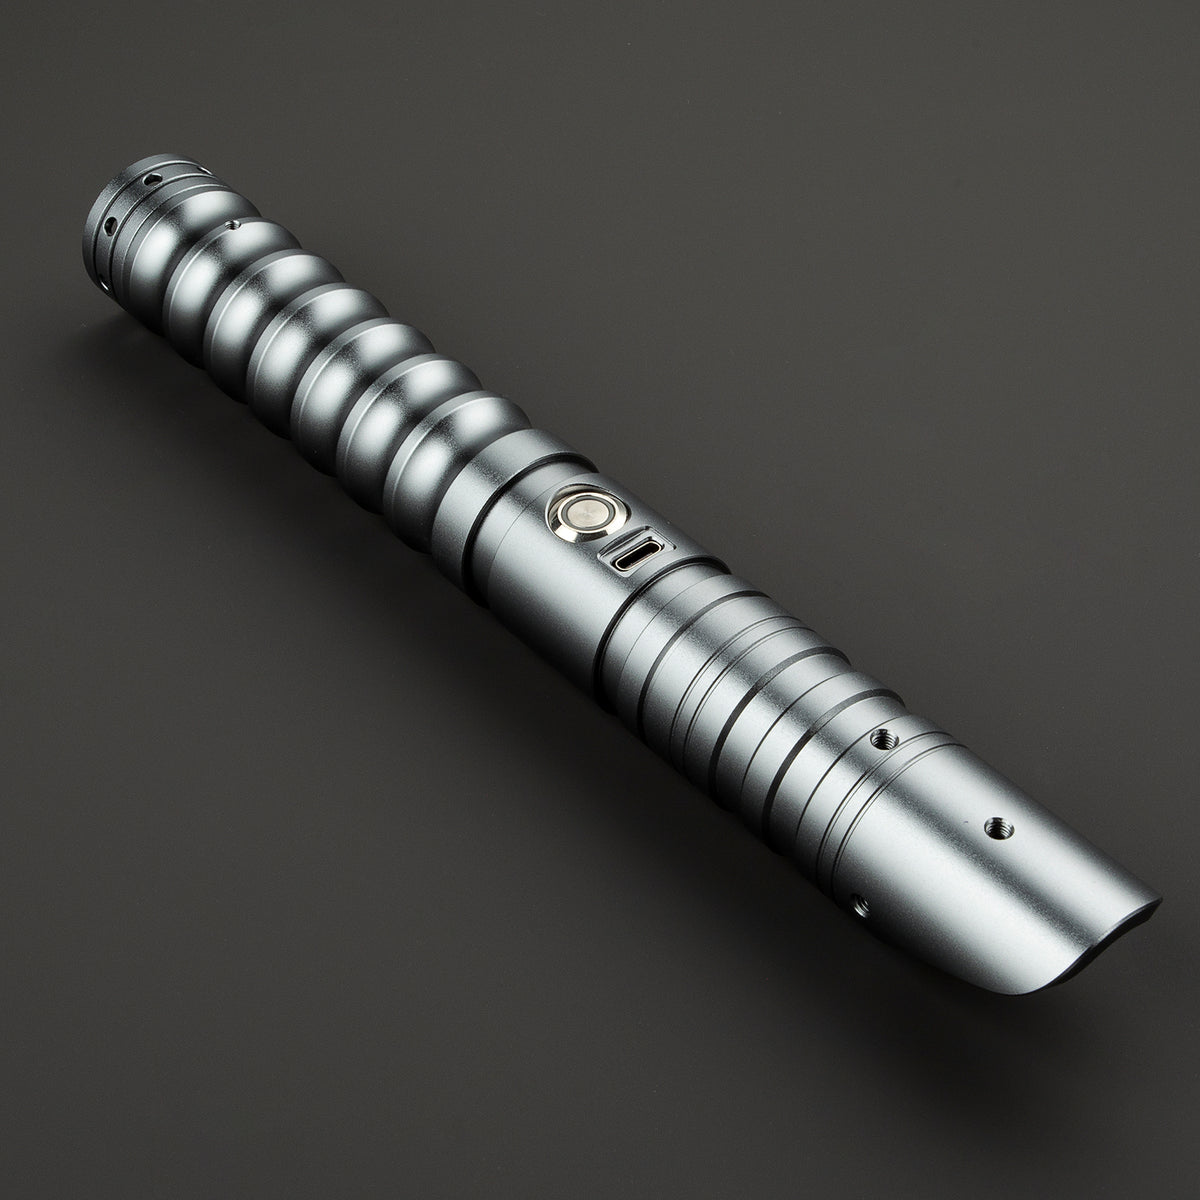 SaberCustom lightsaber complete VHC empty hilt without electronic kit or blade